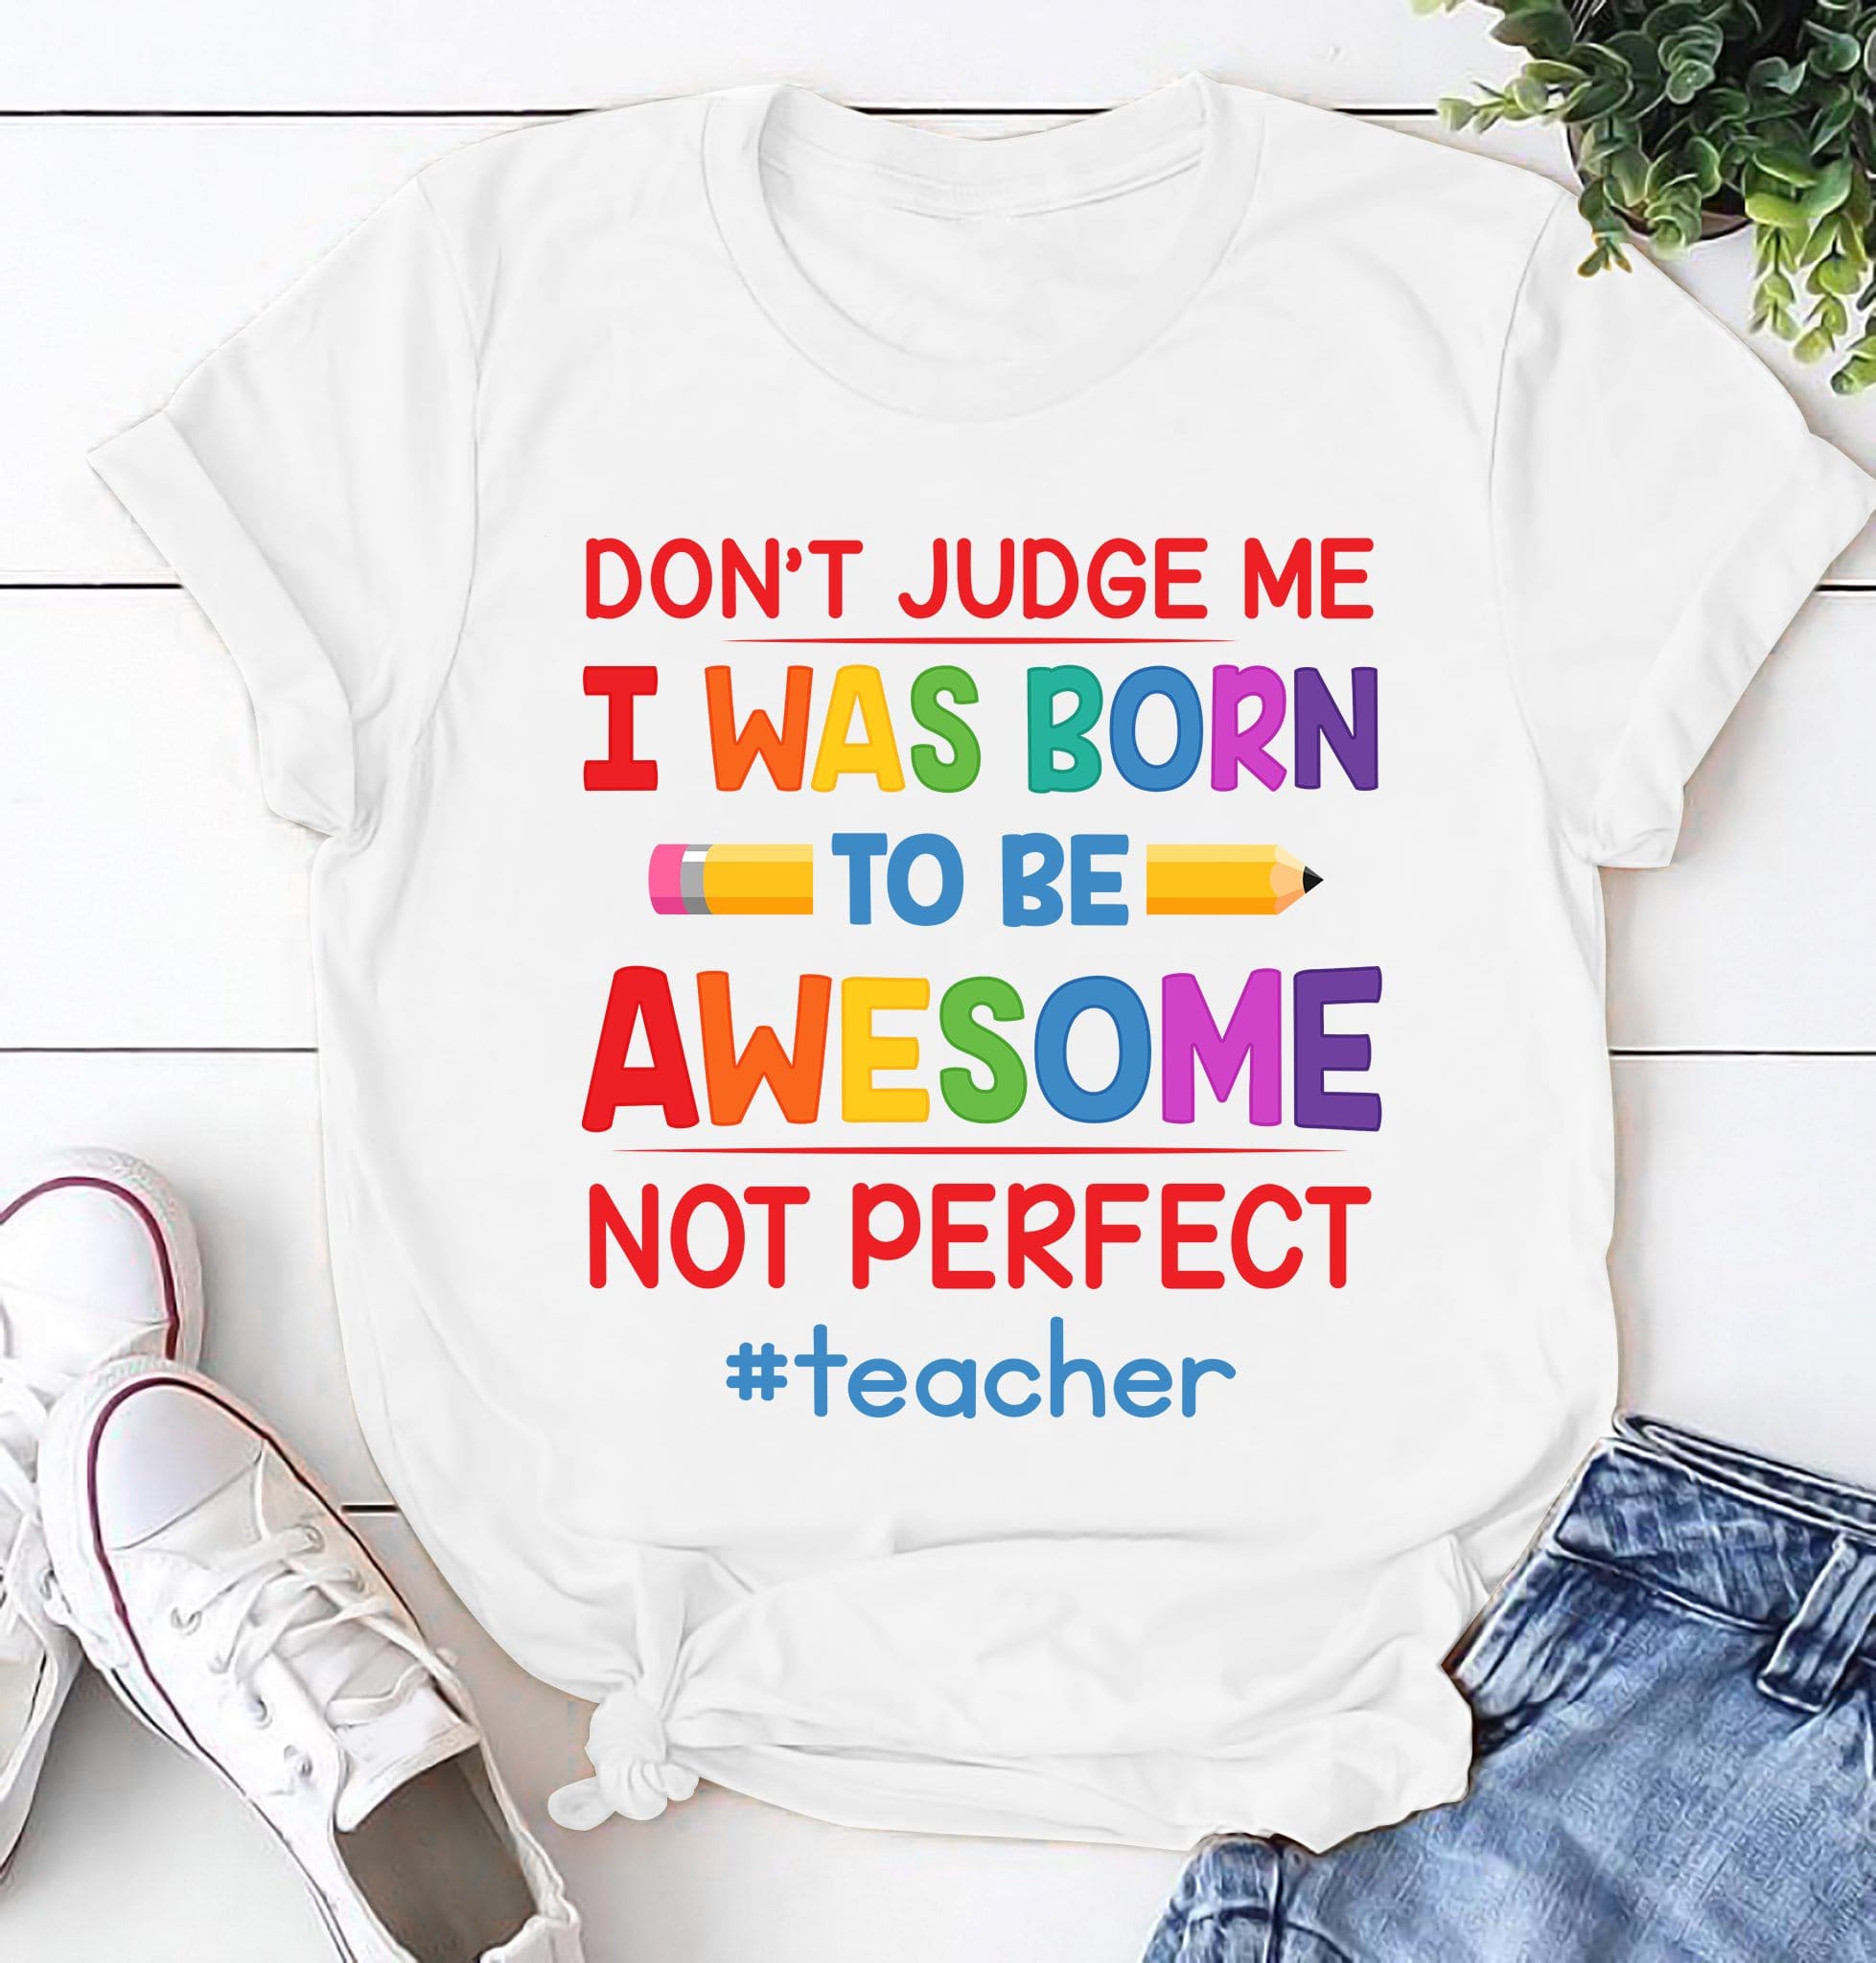 Don't judge me - I was born to be awesome not perfect, T-shirt for teacher